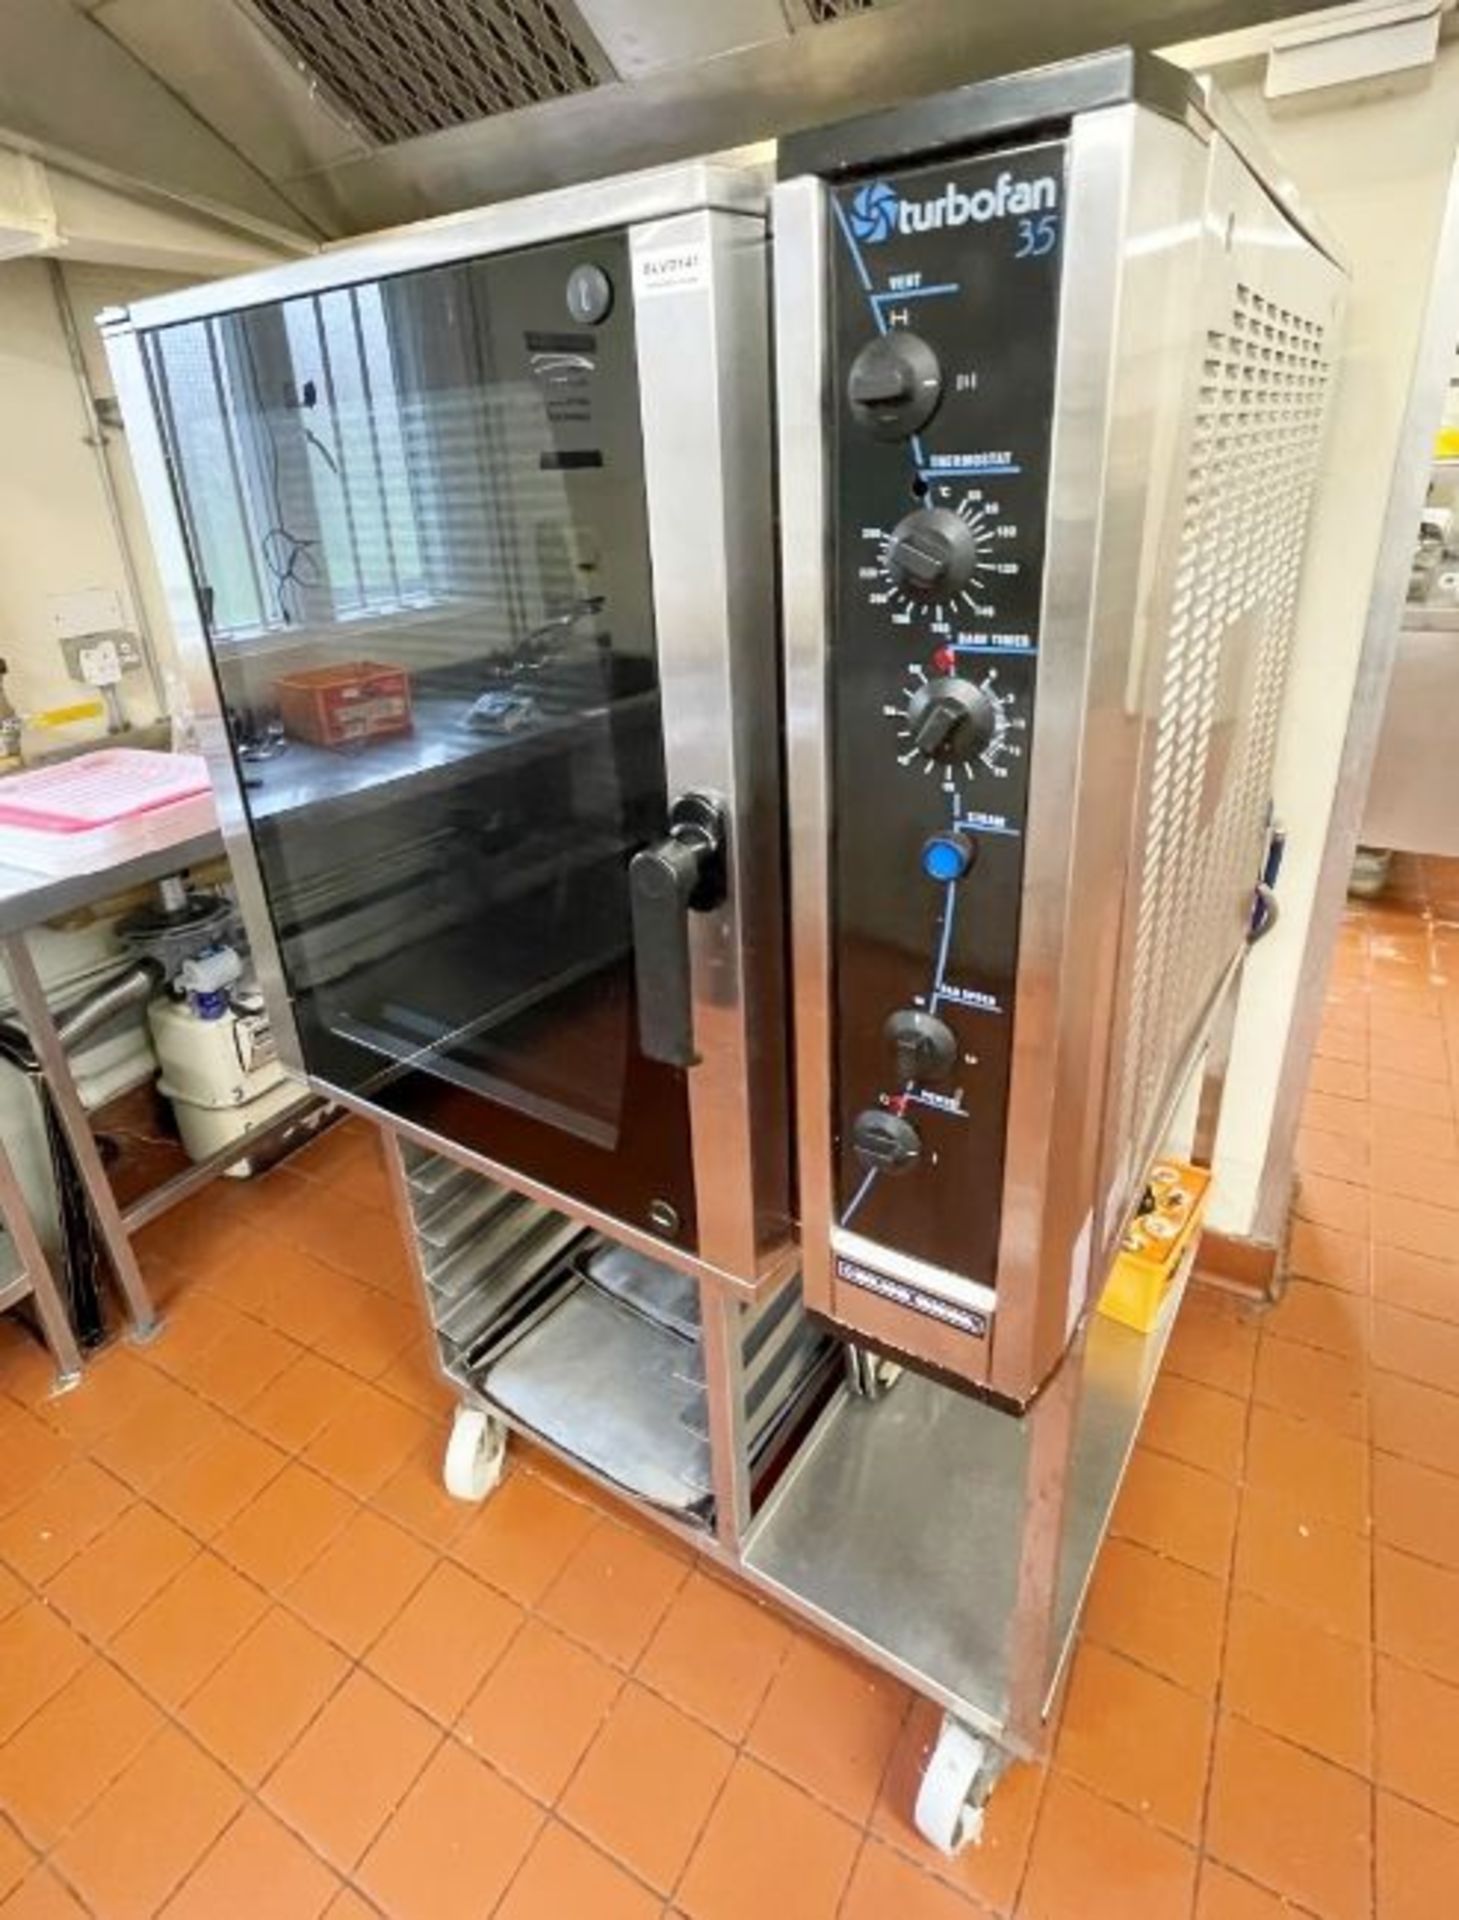 1 x Blue Seal Moffat Turbofan E35 Convection Oven With Stand - Model E35-30-453 - 400v Power - - Image 10 of 16